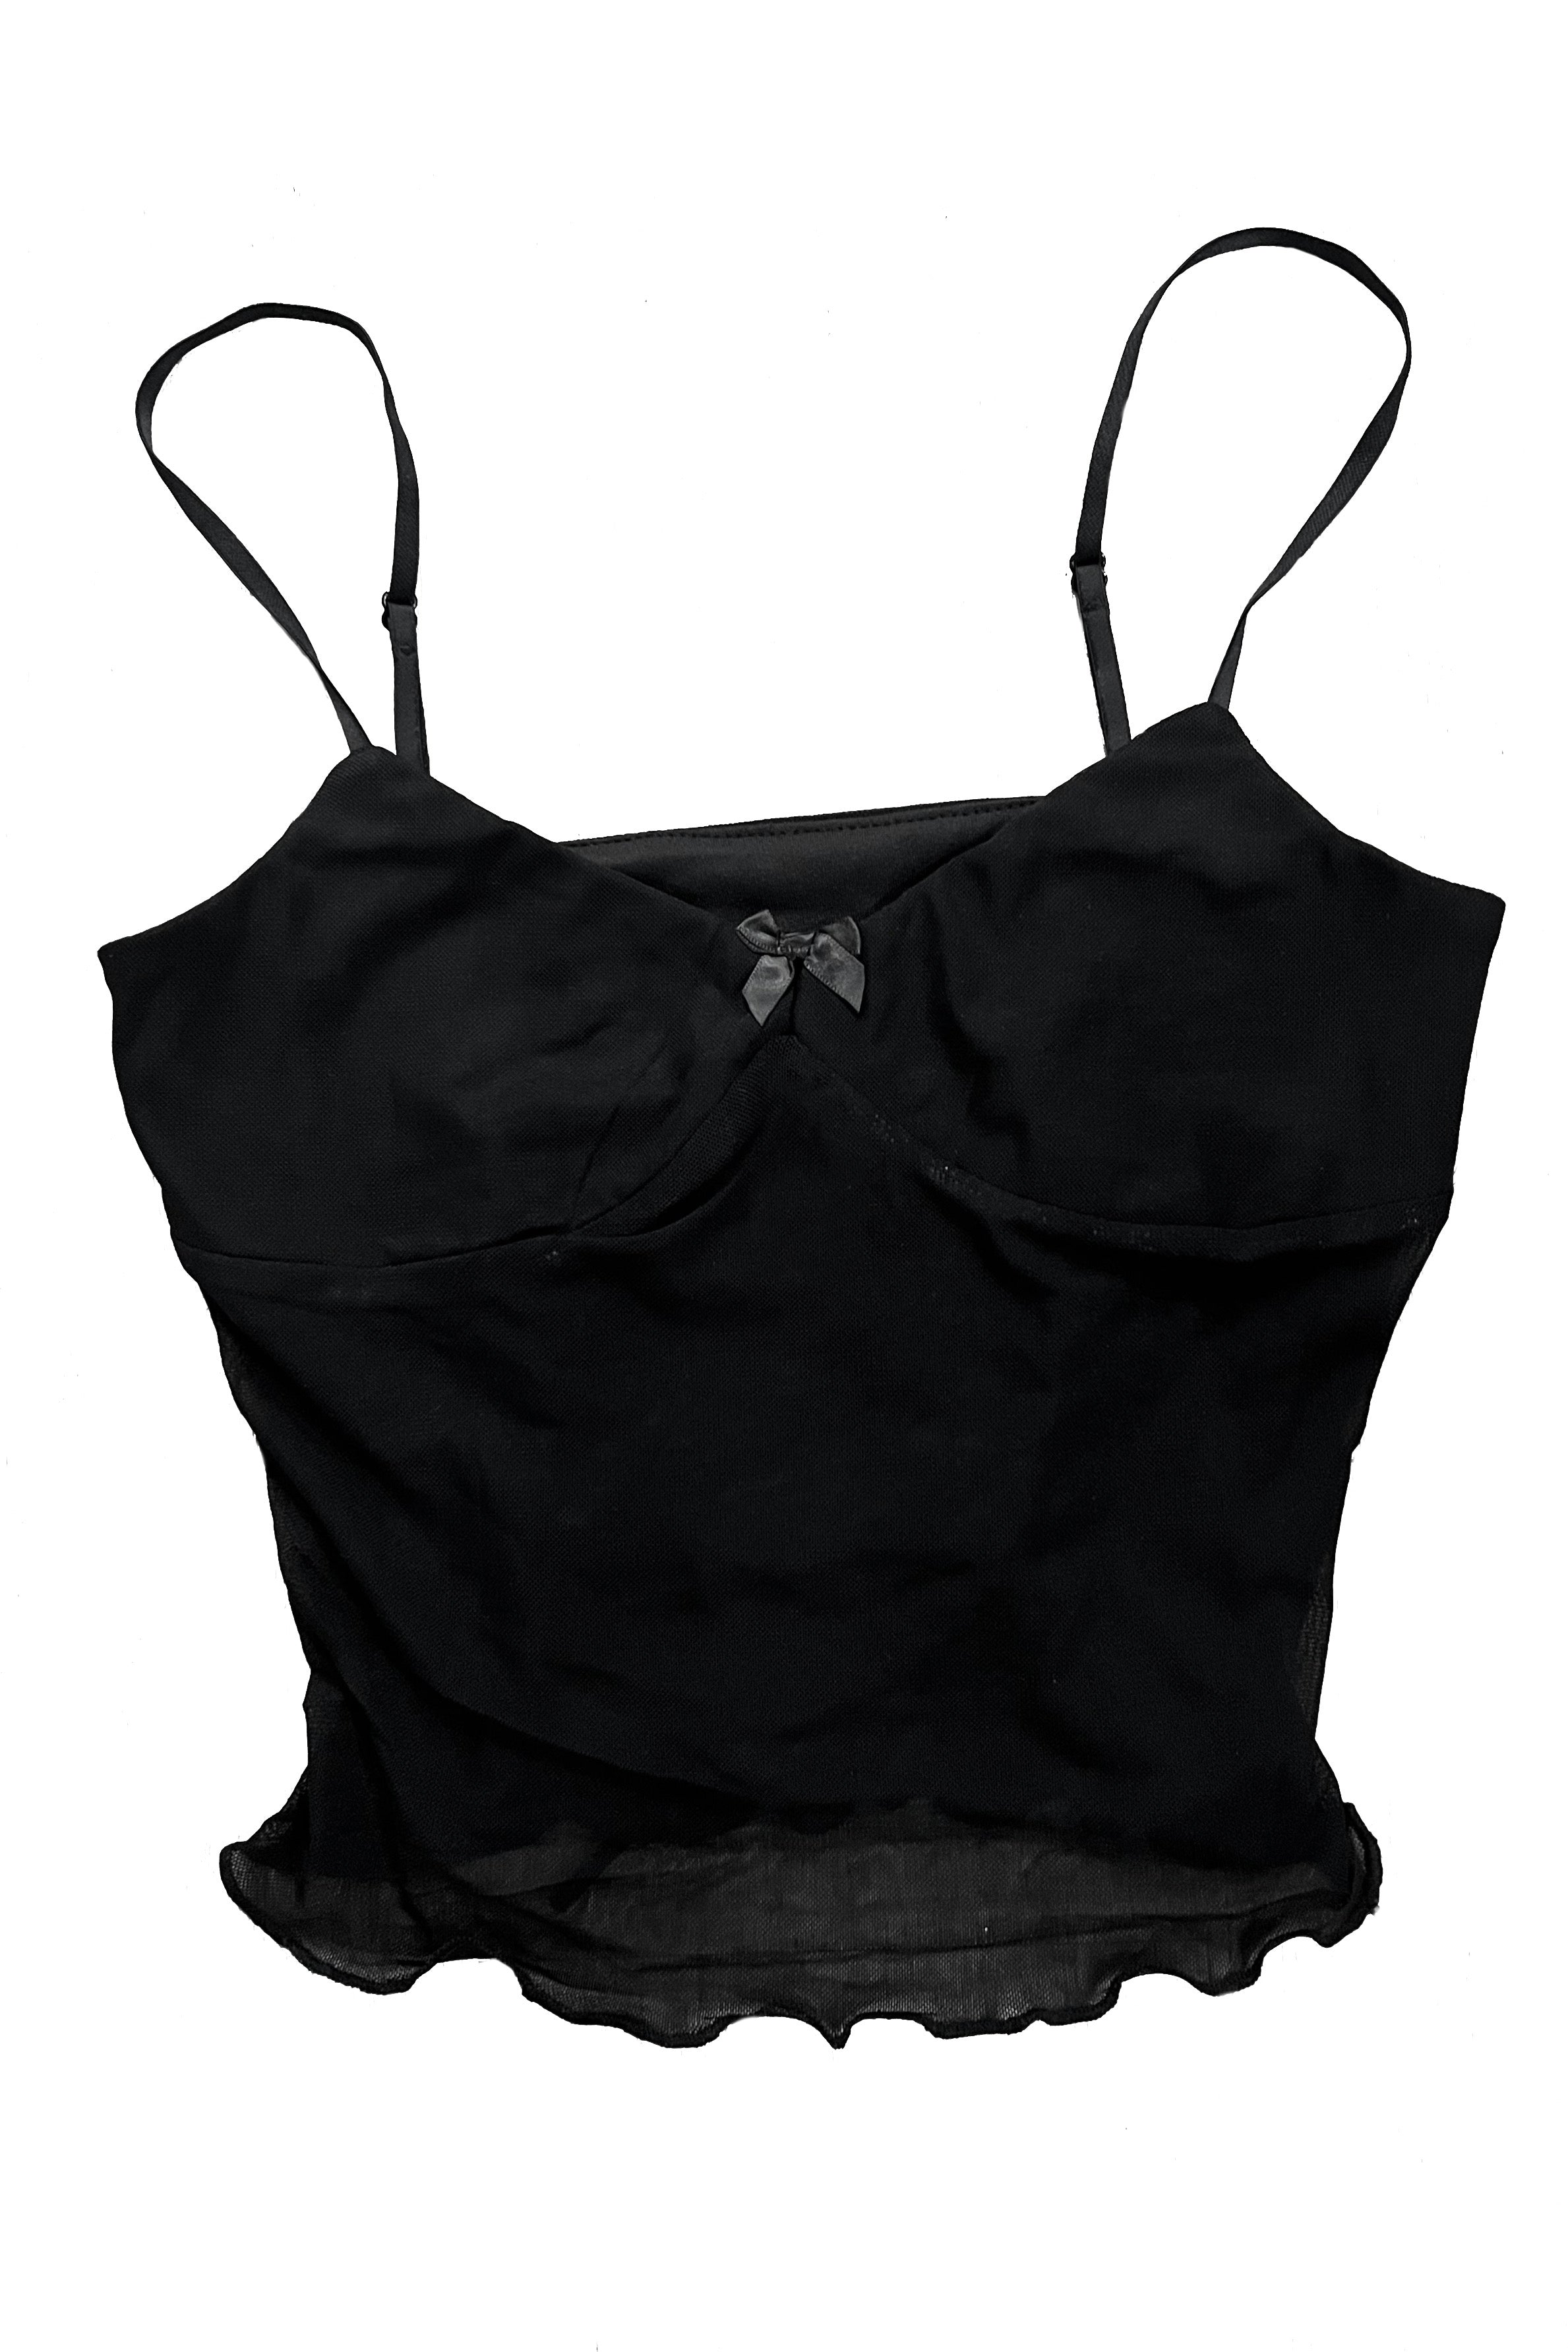 Babs Black Camisole – Tunnel Vision